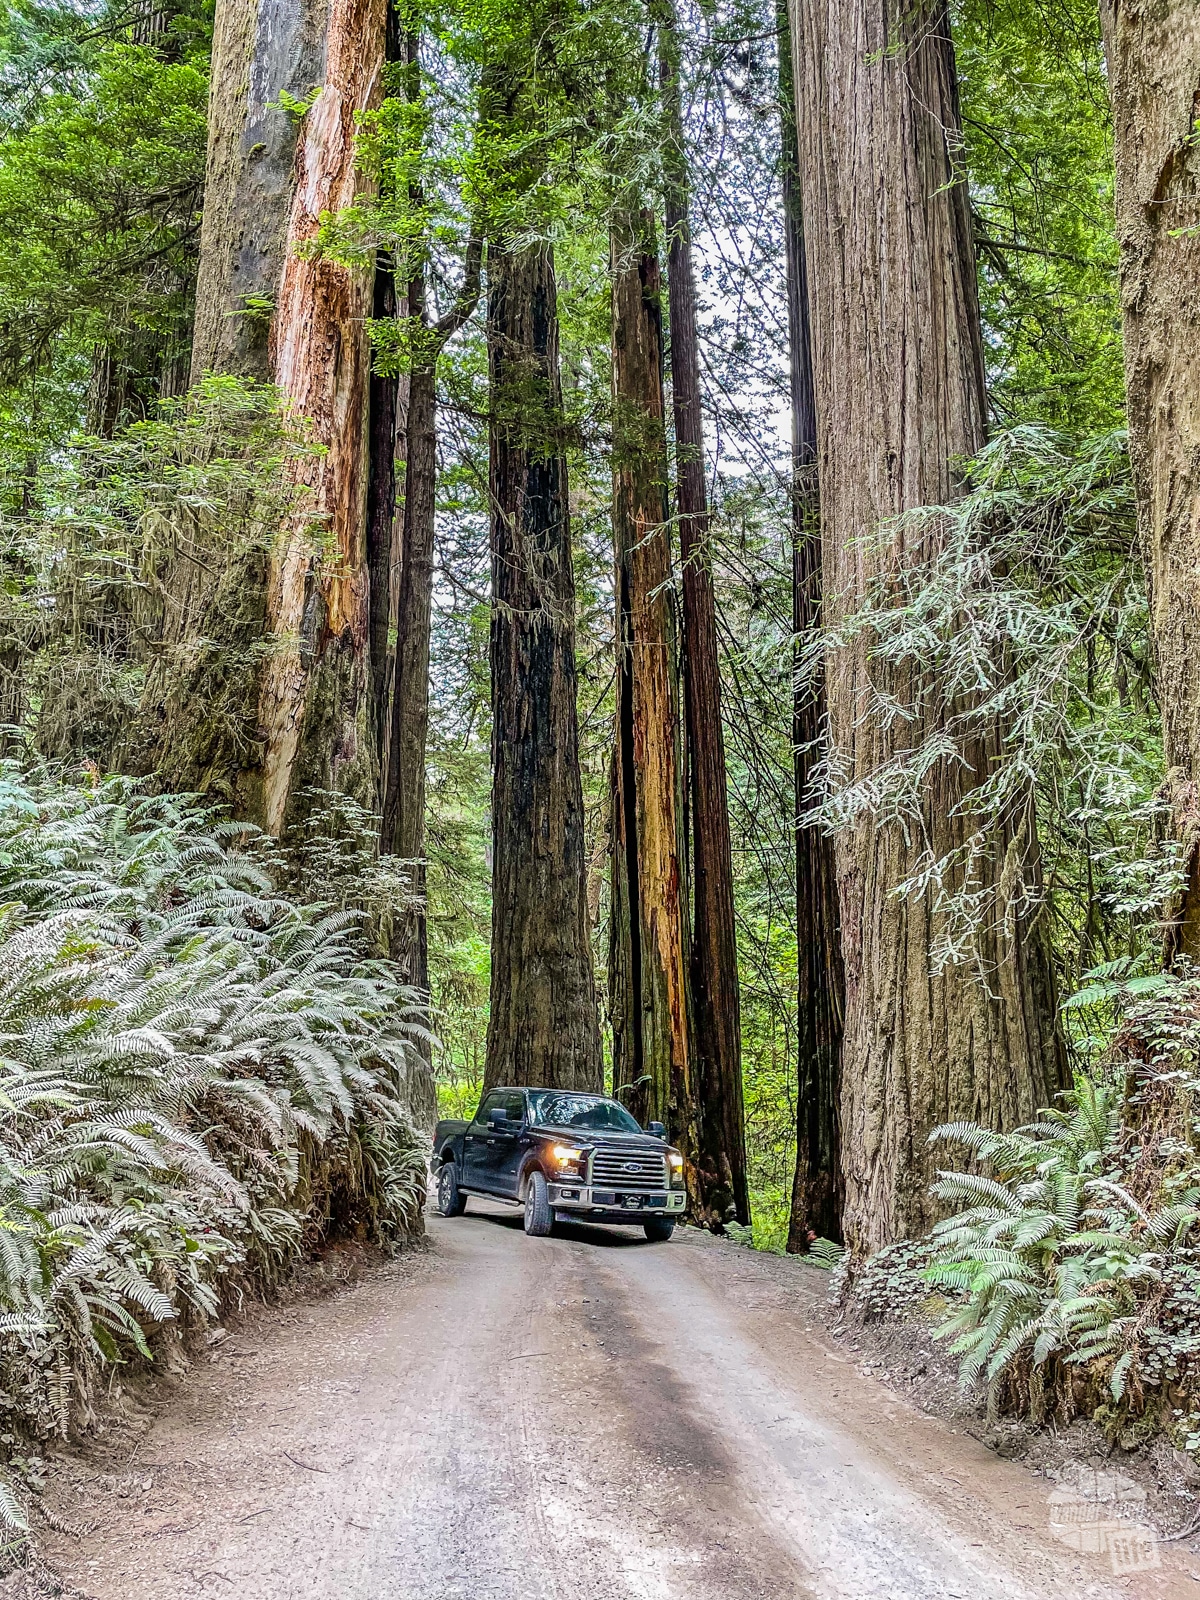 Howland Hills Road is a nice scenic drive at Redwood National Park.